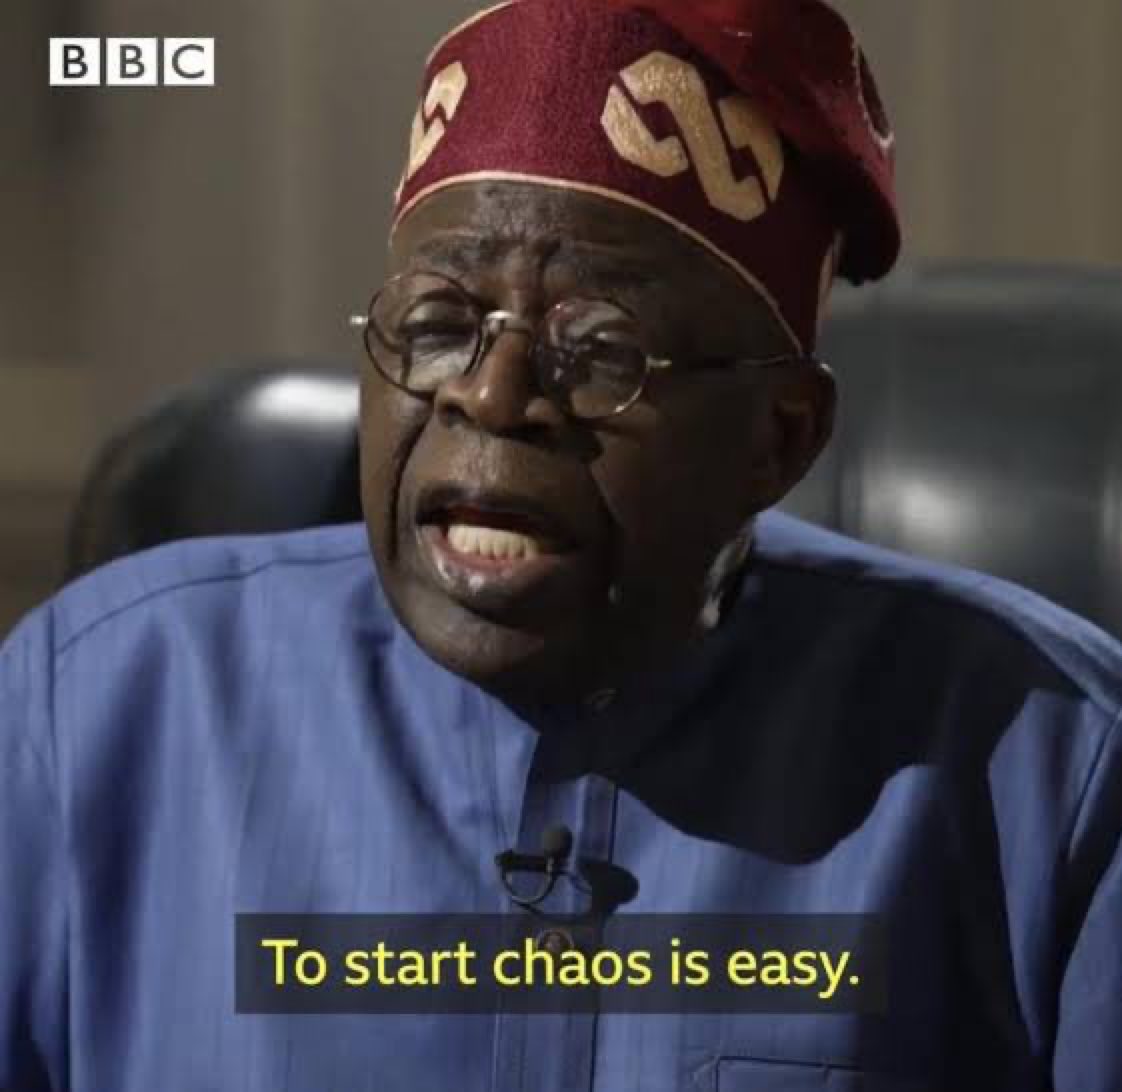 institutions that have been exposed and have lost credibility since the emergence of Bola Tinubu:
• LASG
• APC
• INEC
• NPF
• NPC
• EFCC
• NDLEA
• Costums
• Nigerian Judiciary 
• Nigerian National Assembly 
• CSU
• JAMB
• WAEC
etc.

What is left? 🤦🏾‍♂️